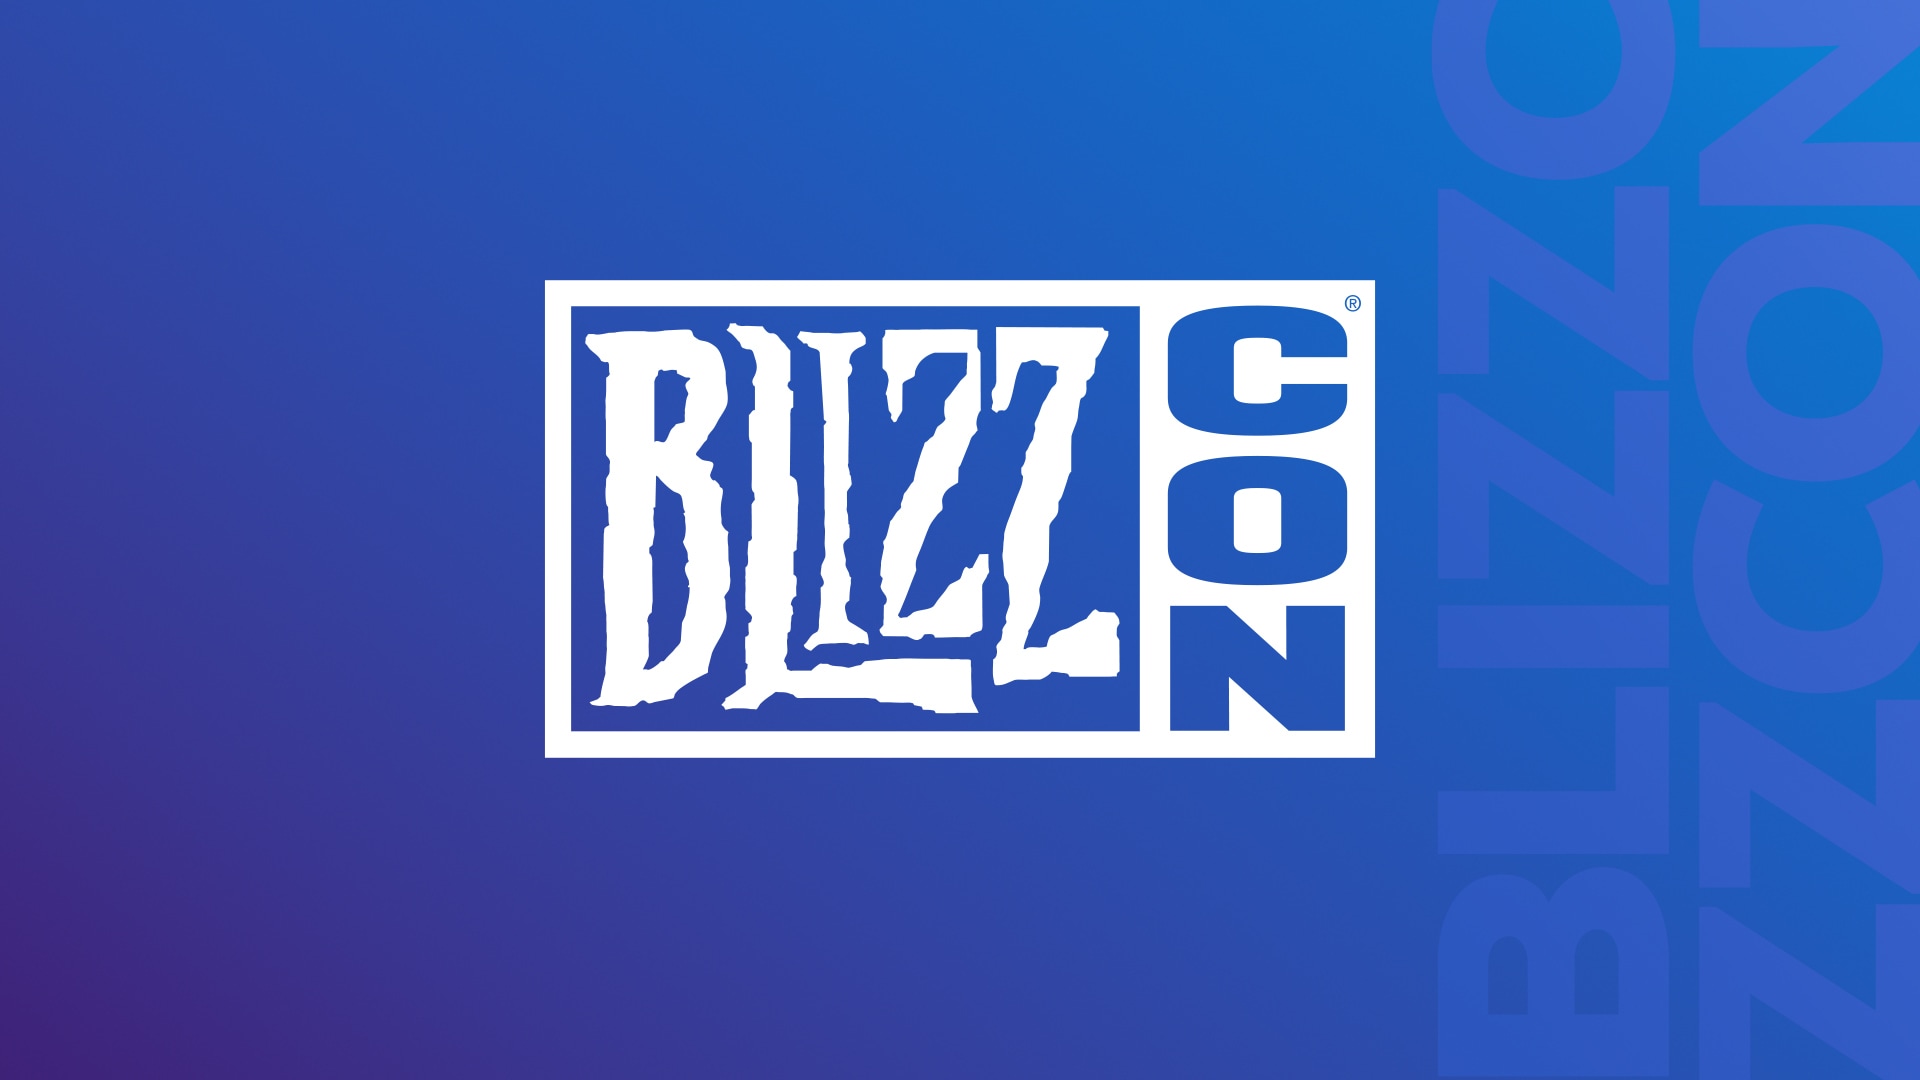 After careful consideration over the last year, we at Blizzard have made the decision not to hold BlizzCon in 2024. This decision was not made lightly